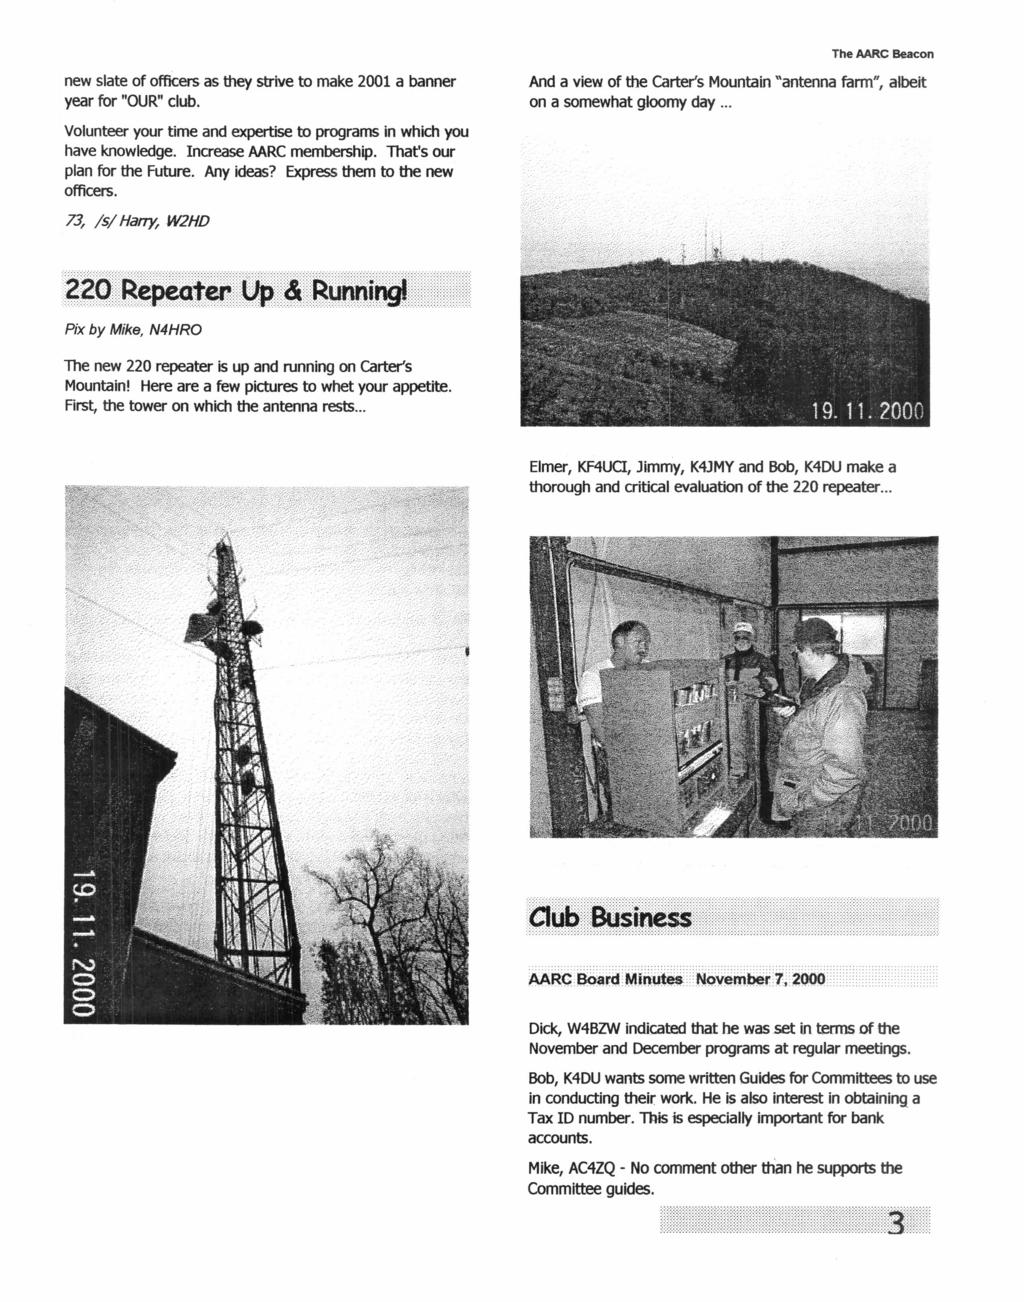 The AARC Beacon new slate of officers as they strive to make 2001 a banner year for "OUR" club. And a view of the carter's Mountain "antenna farm", albeit on a somewhat gloomy day.